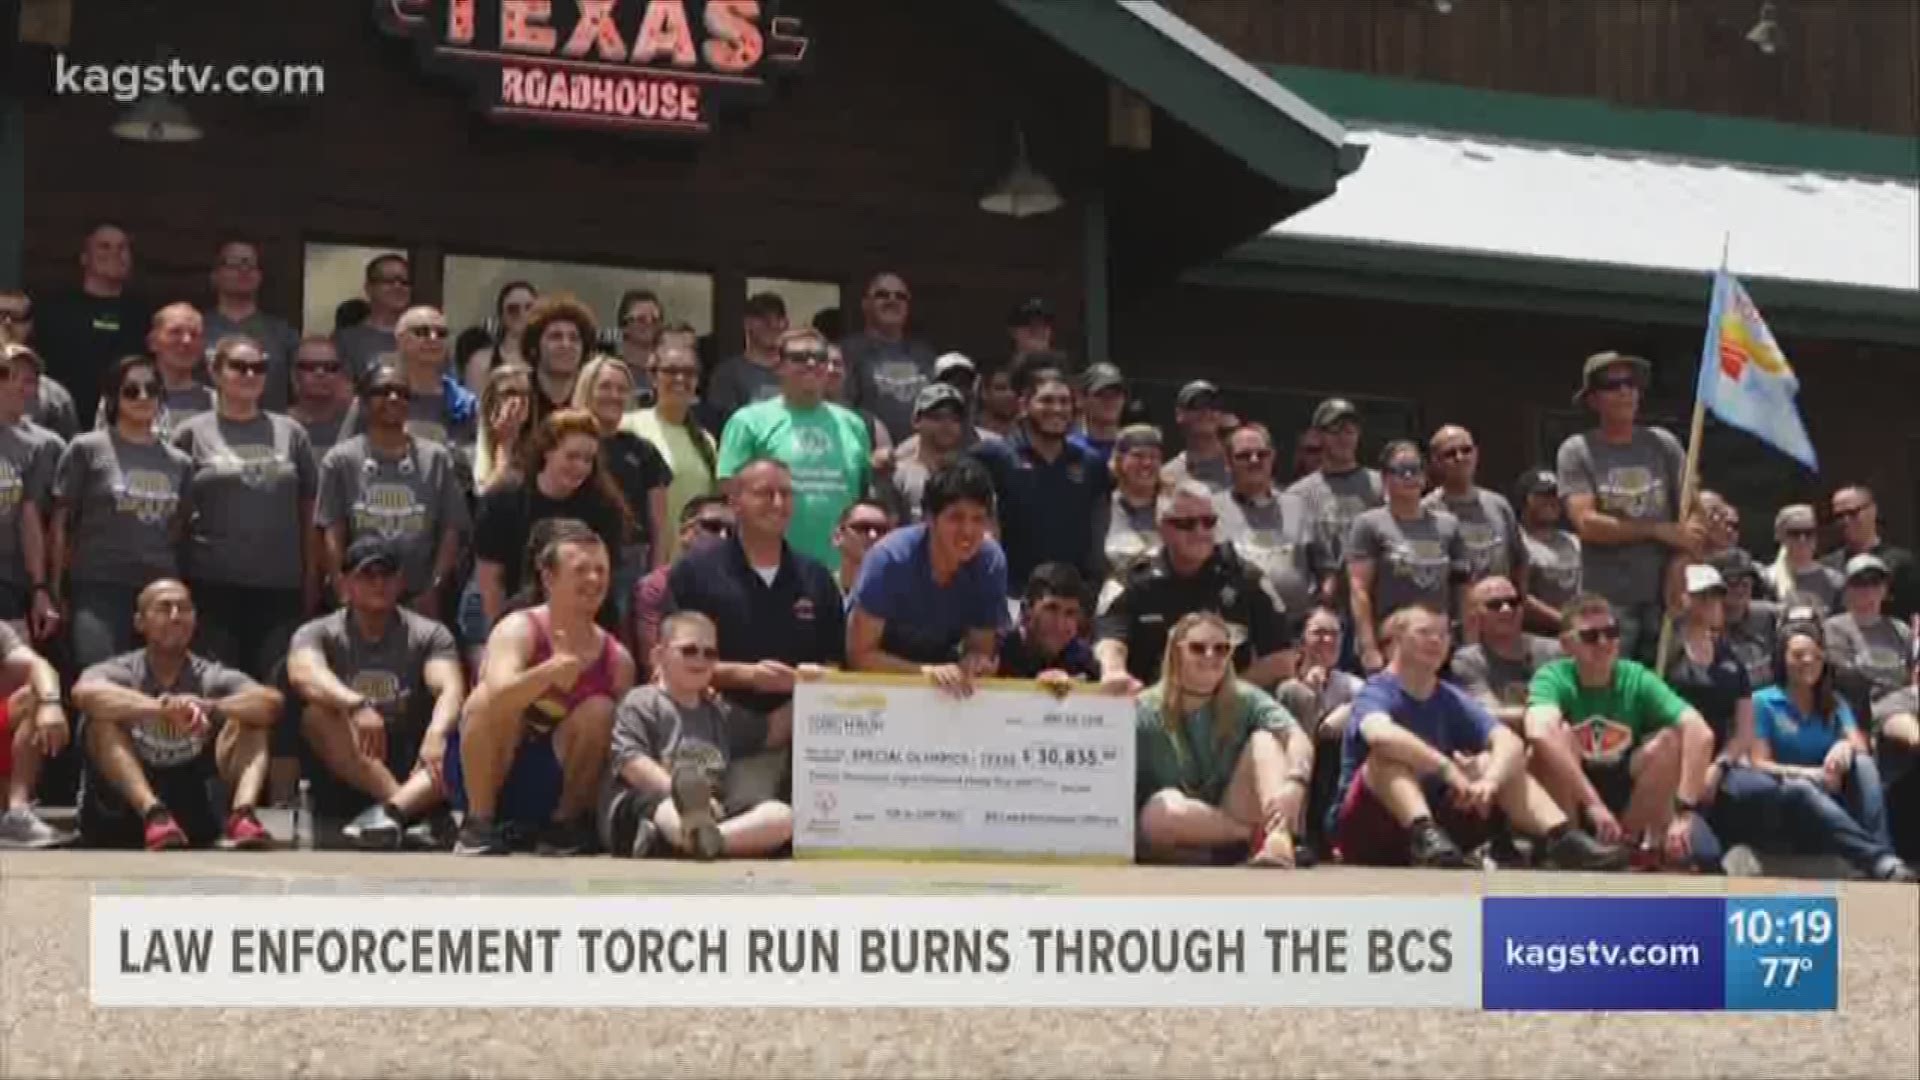 The Texas Law Enforcement Torch Run made its way through the BCS today on their journey to Arlington. This year our local agencies raised over $30,000 for the special Olympics.